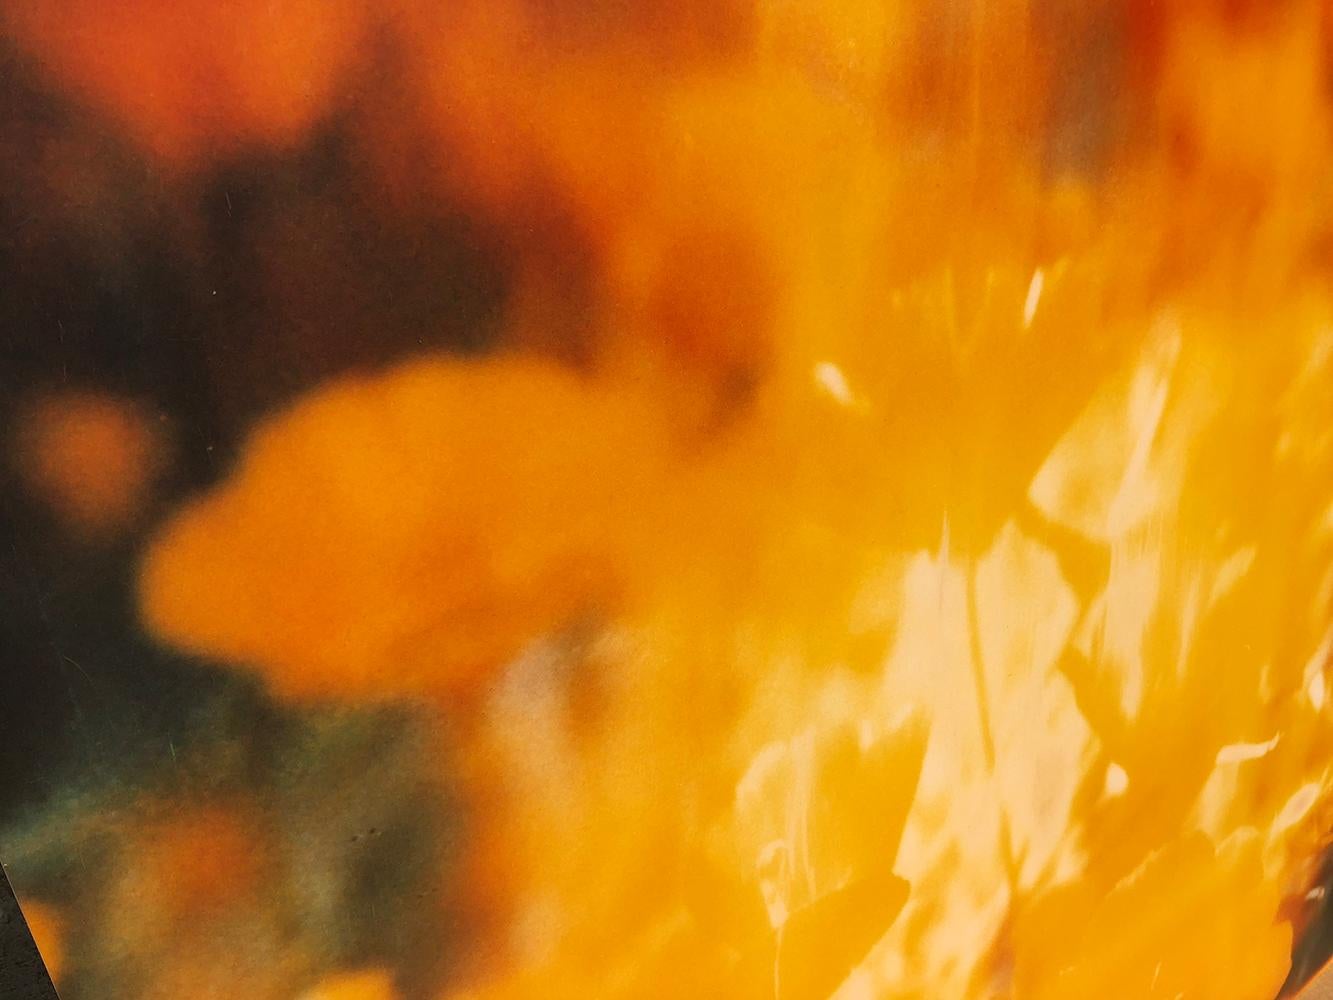 Yellow Flower (The Last Picture Show) - 2005

128x125cm, 
Edition 5/5, 
analog C-Print, hand-printed by the artist on Fuji Crystal Archive Paper, 
based on a Polaroid, 
signature label and certificate, 
Artist Inventory 672.04, 
Not mounted. (an